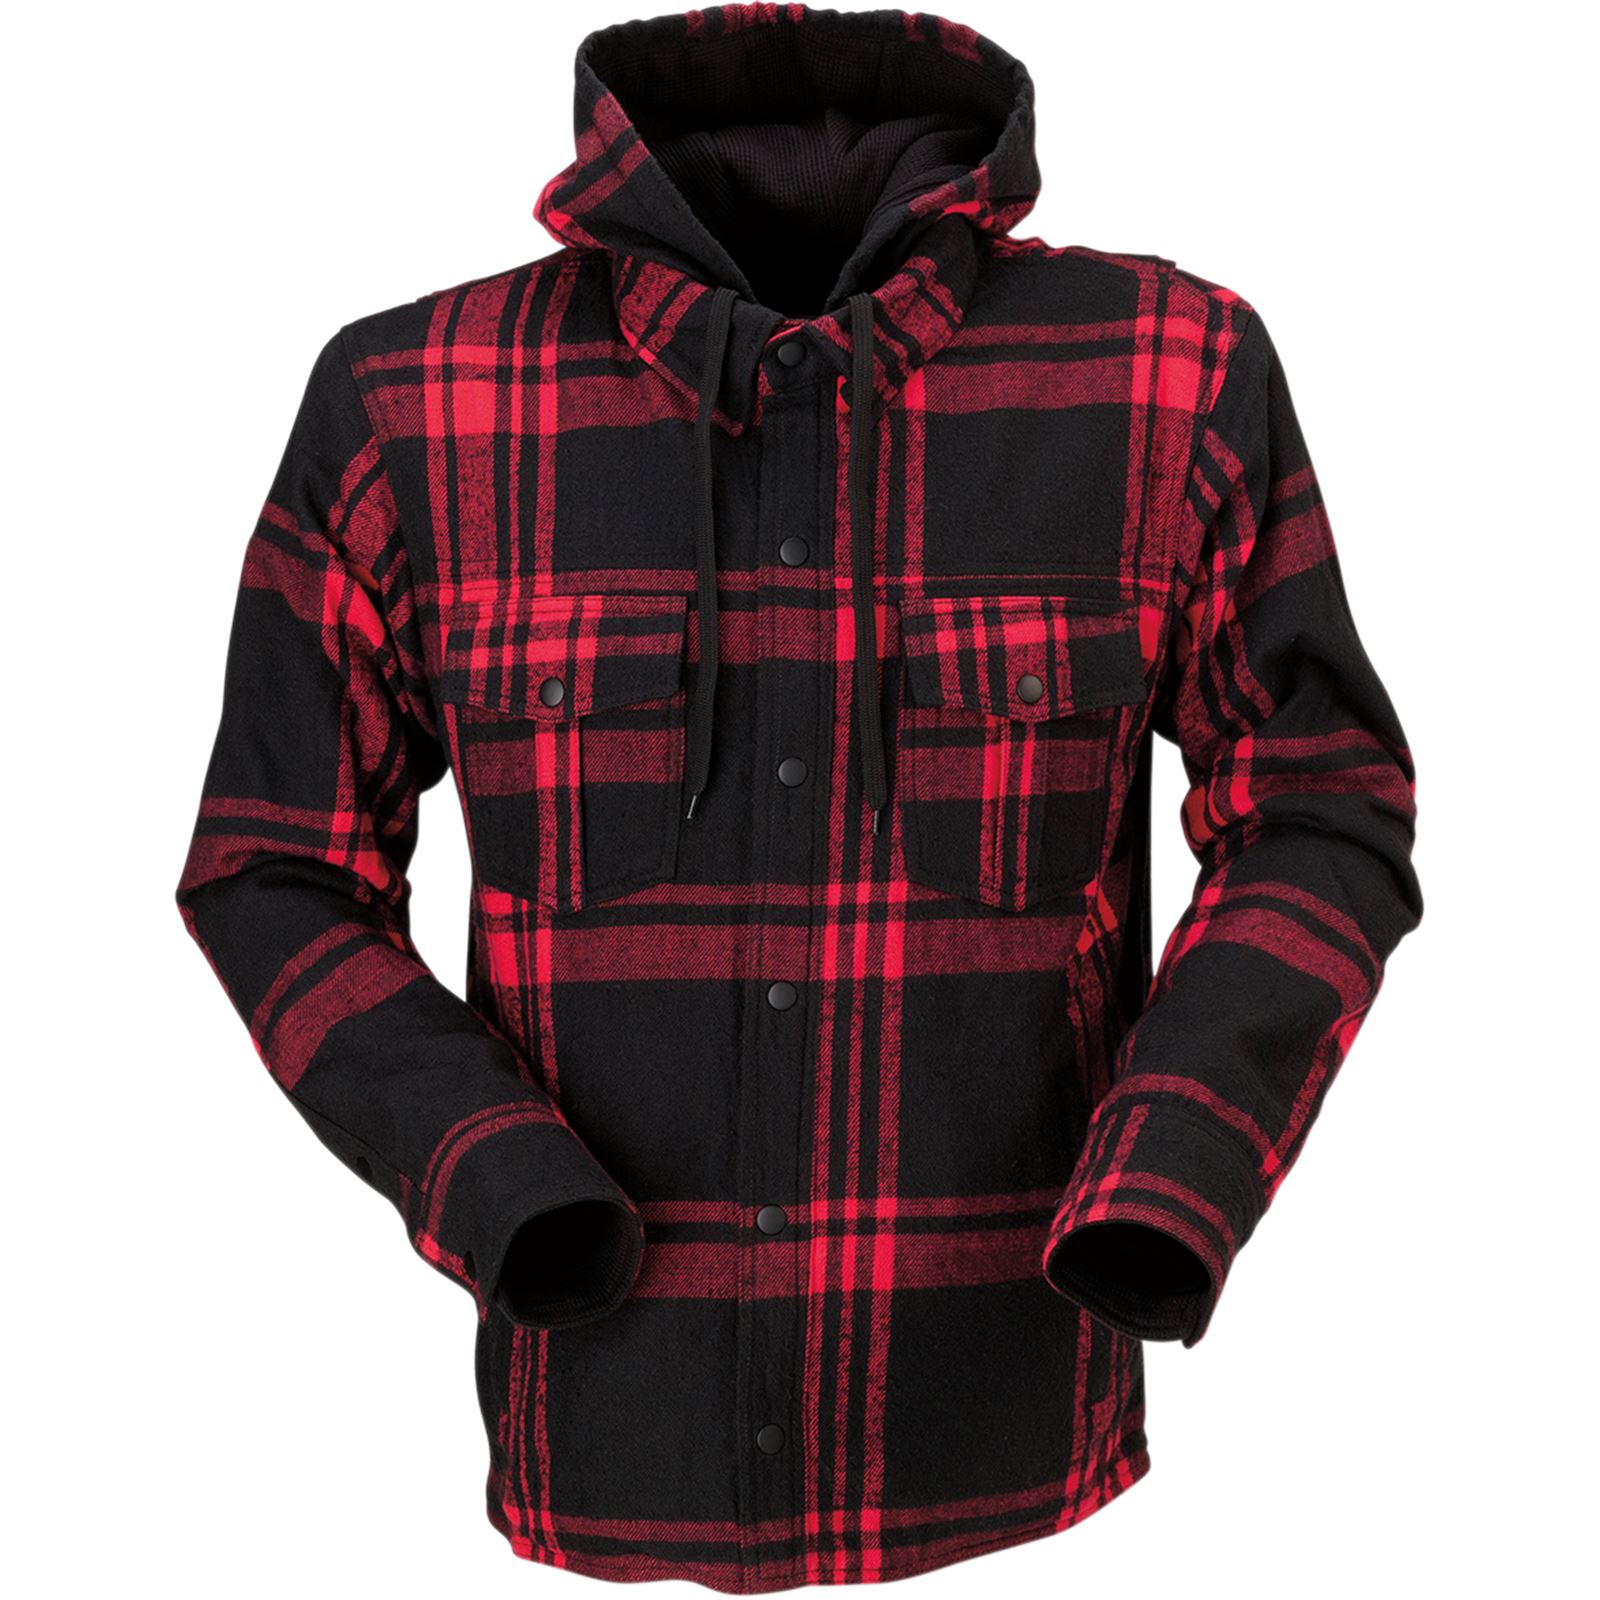 Z1R Timber Flannel Shirt - Red/Black